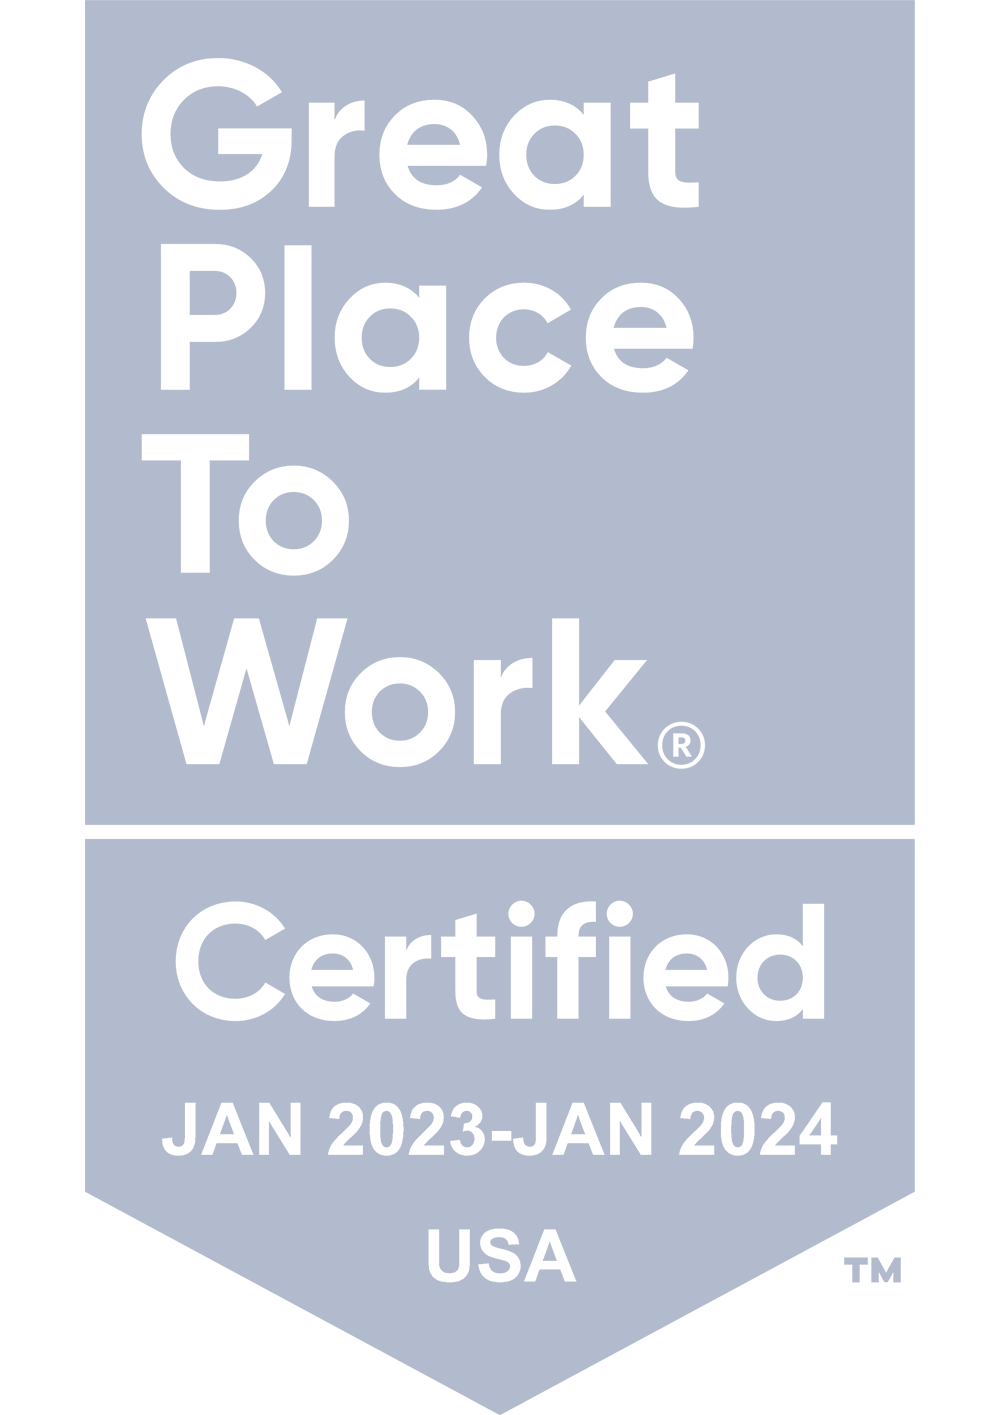 Great Places to Work - Certified